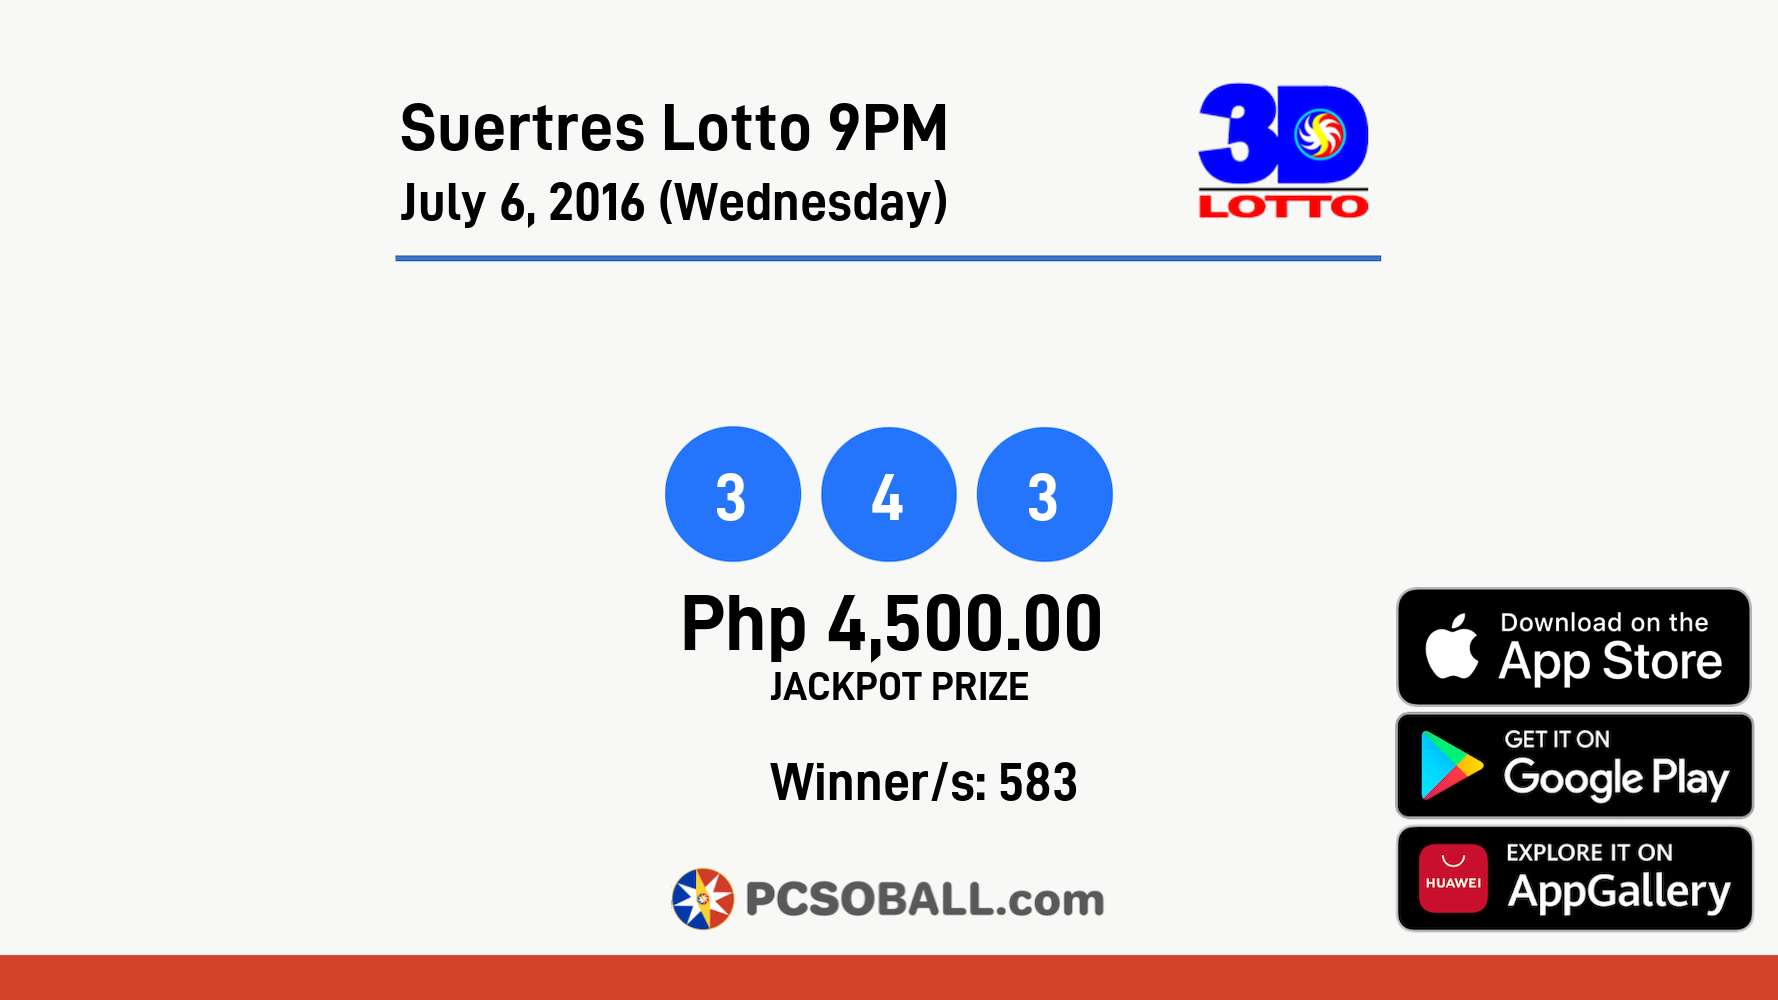 Suertres Lotto 9PM July 6, 2016 (Wednesday) Result